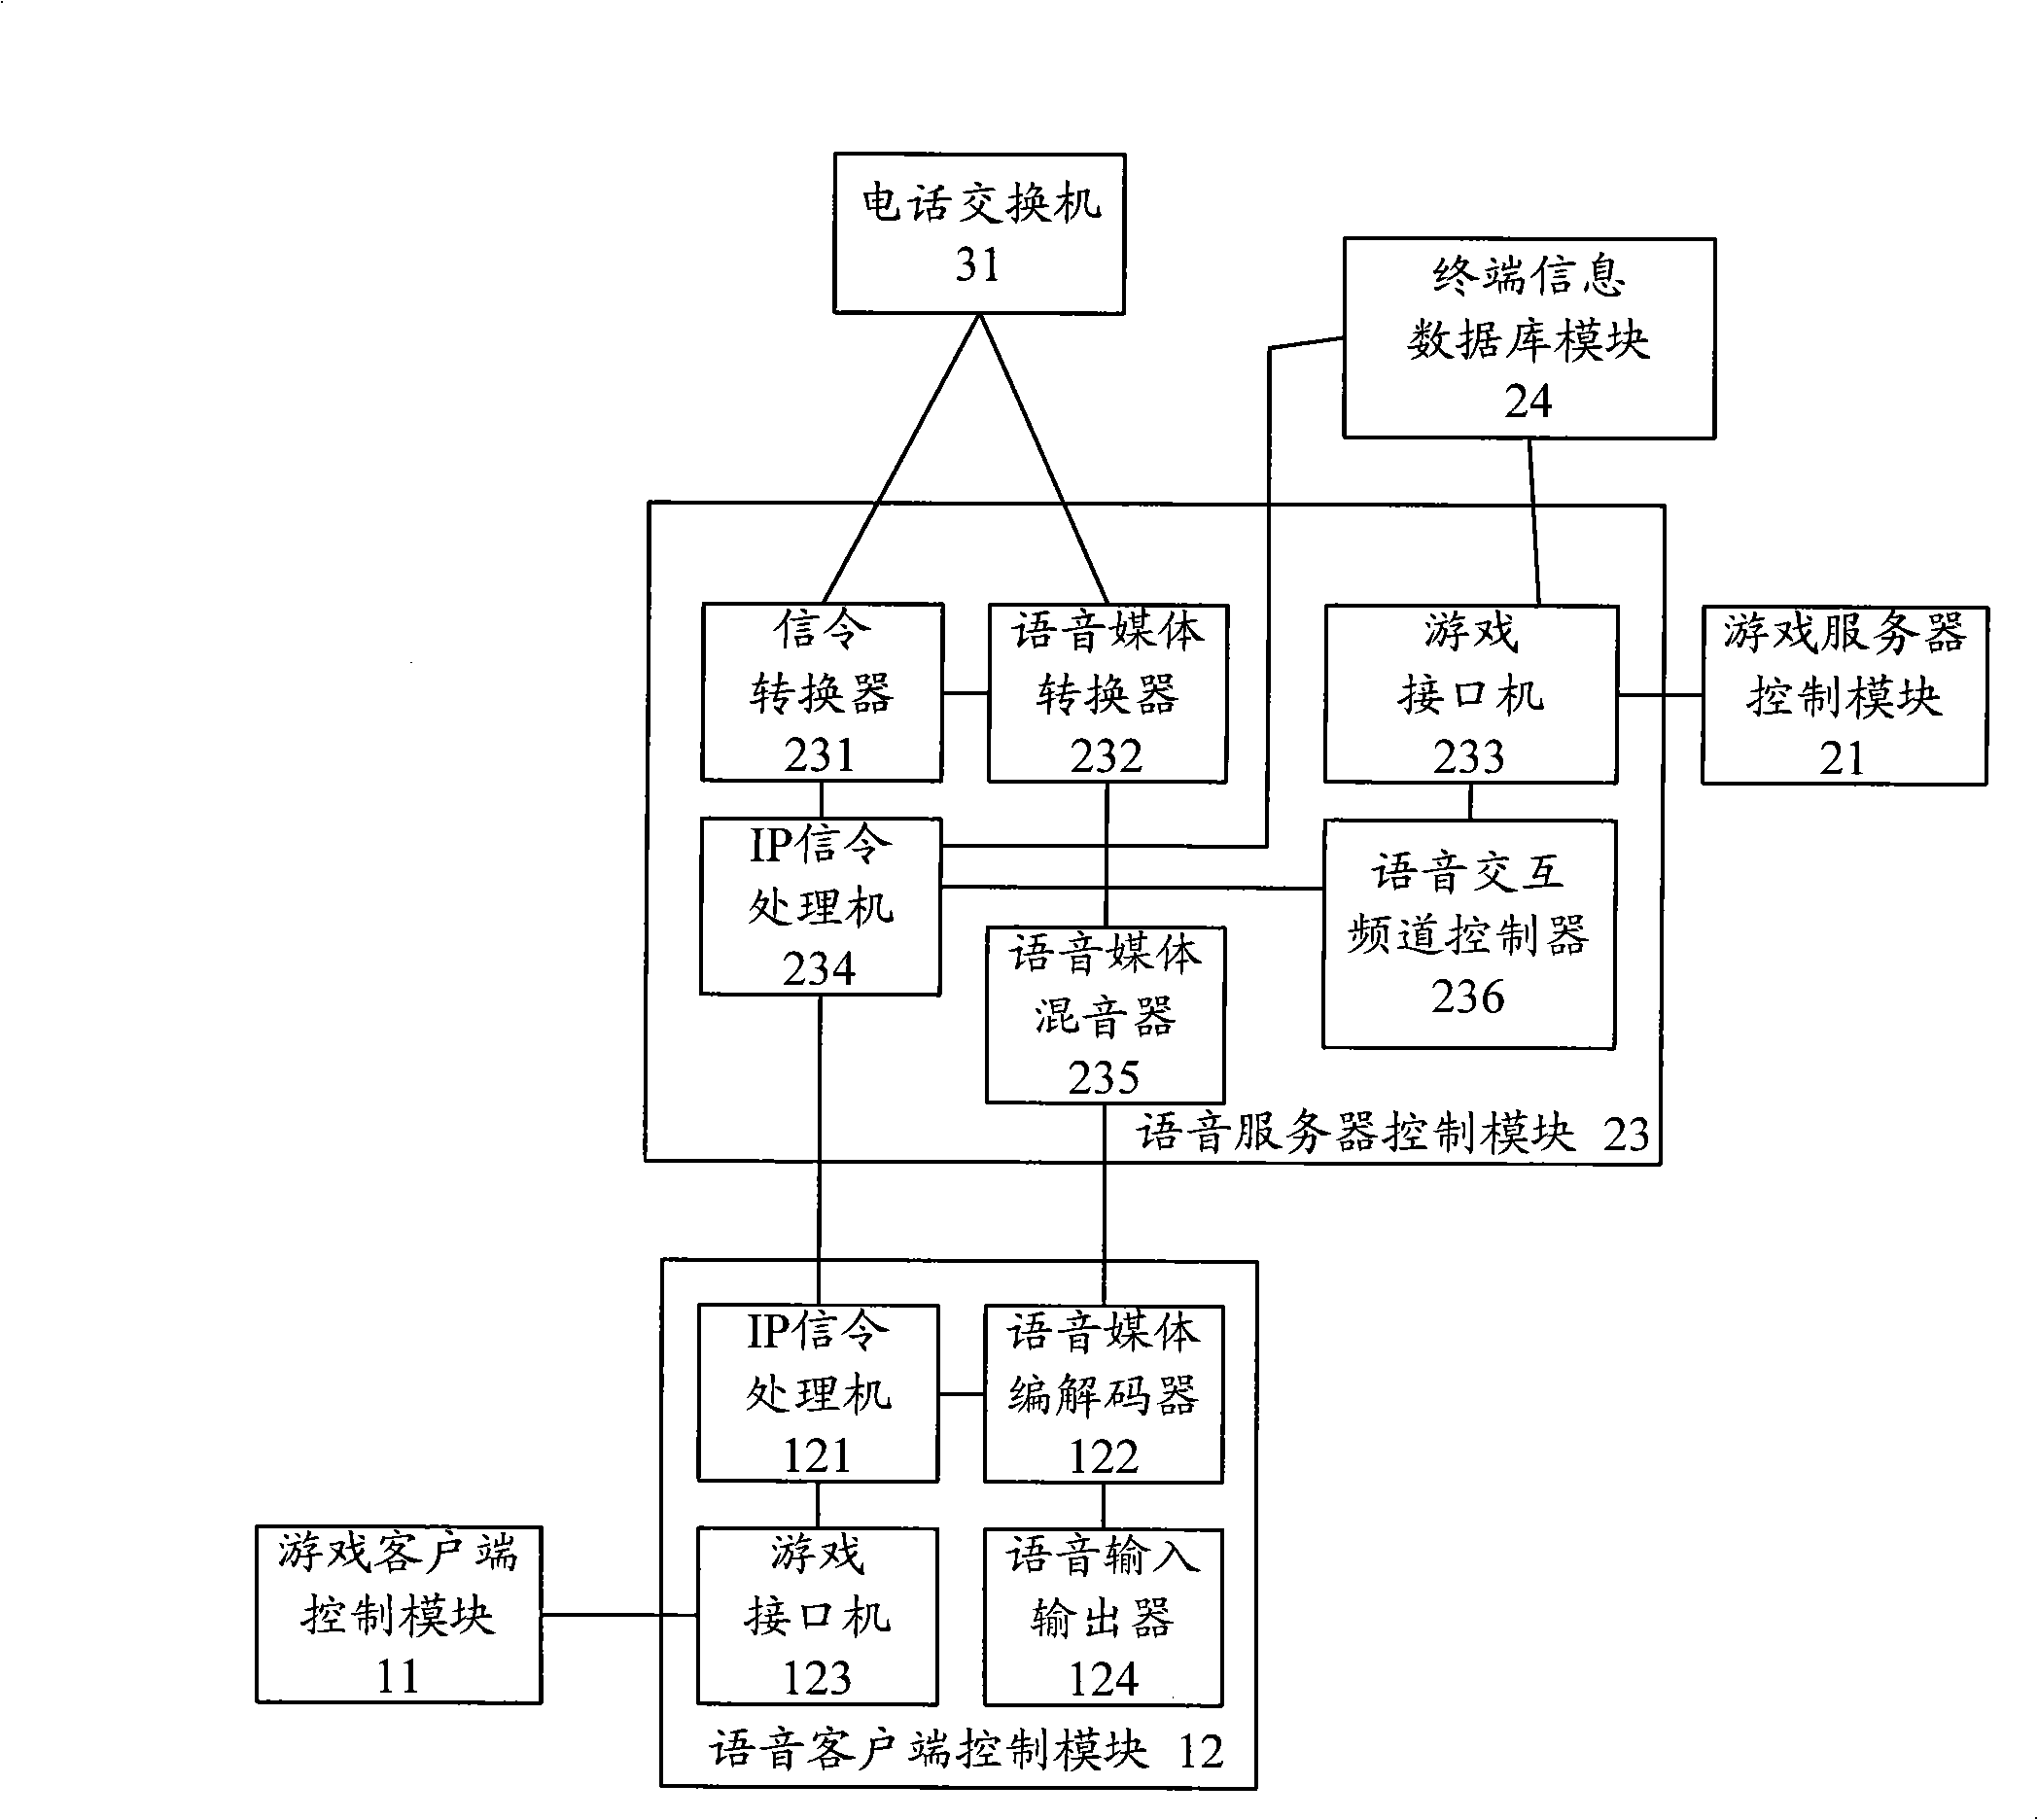 System and method for providing real-time and reliable multi-person speech interaction in network game